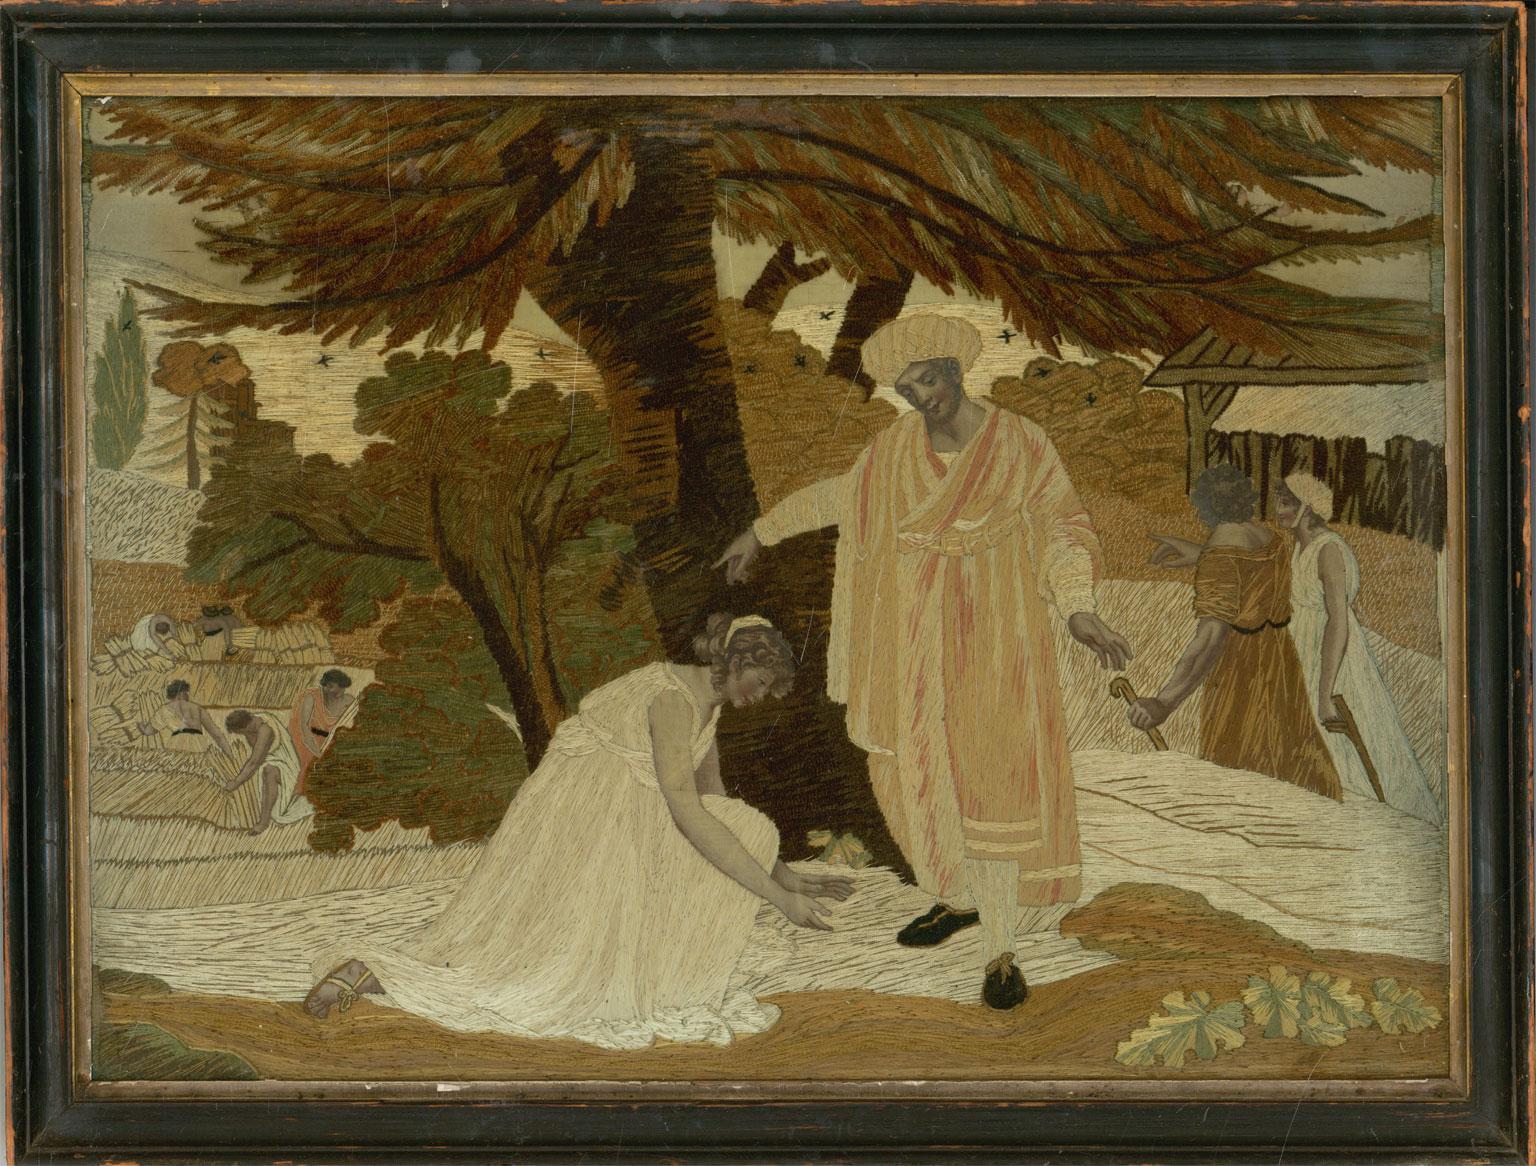 Exceptional Early 19th Century Silkwork - Classical Scene - Mixed Media Art by Unknown